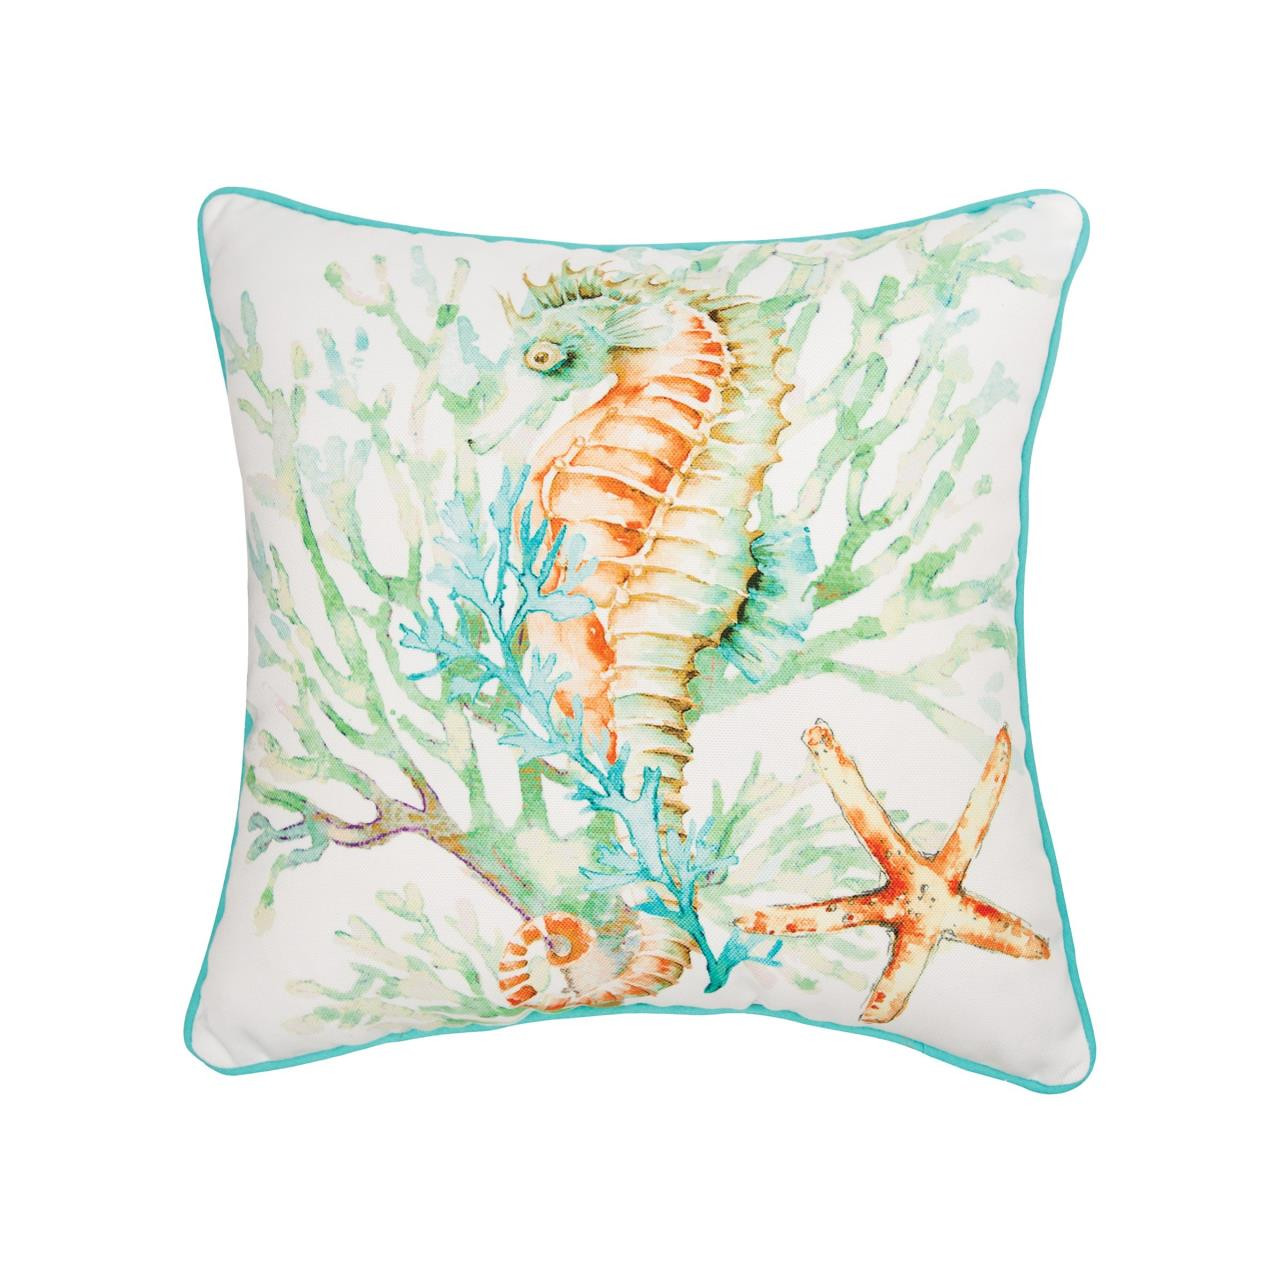 Colorful Seahorse Pillow - 008246739814